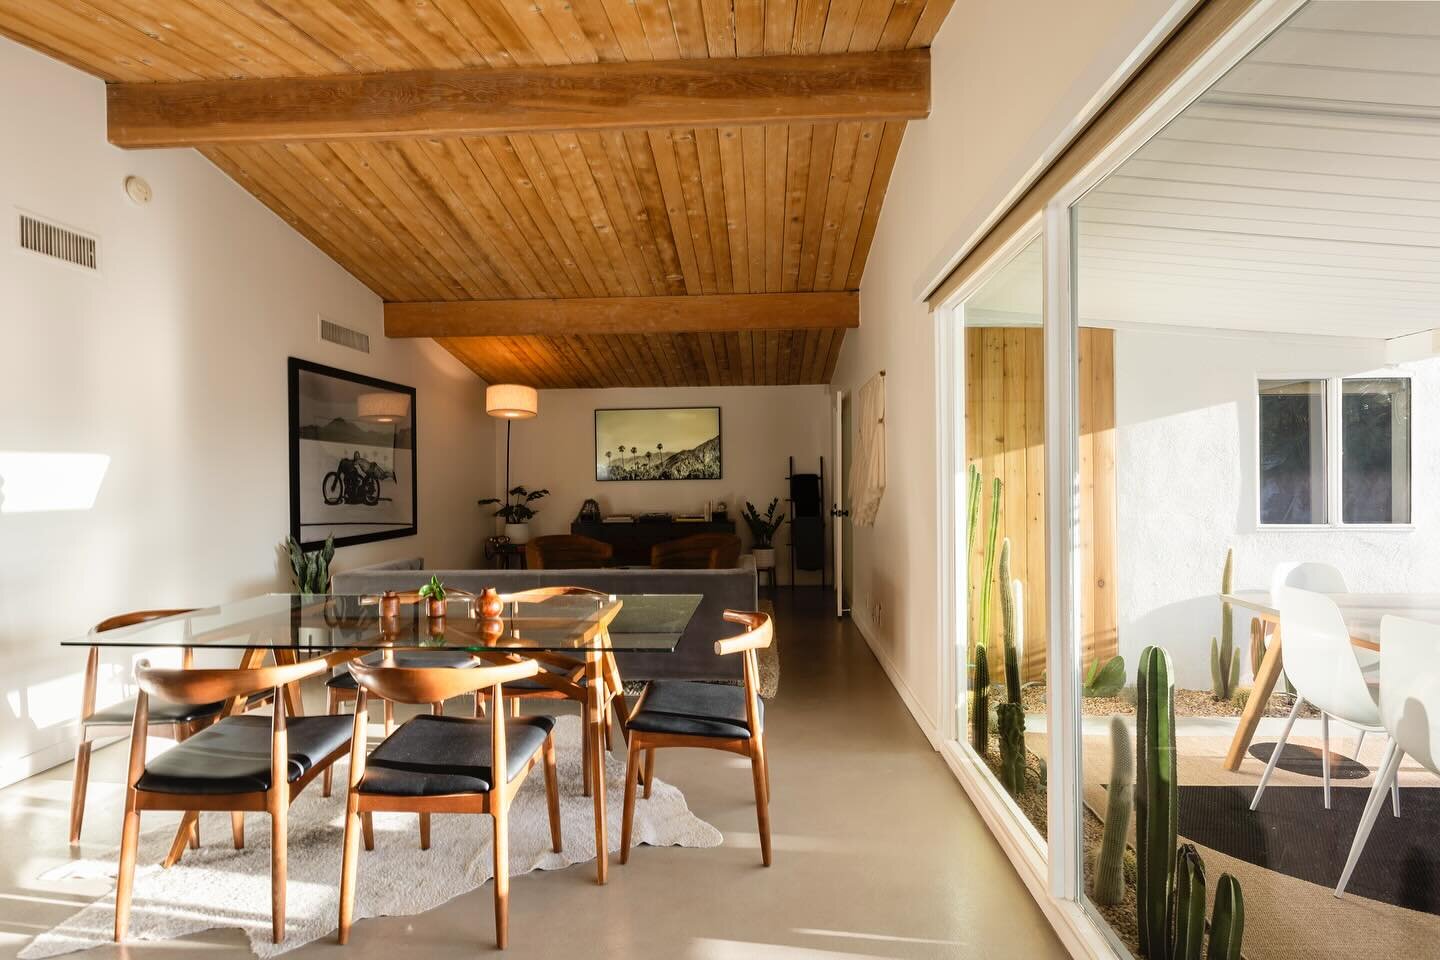 The Den will be returning to @modernism_week for the Racquet Club Estates Midcentury Home Tour on Saturday, February 17th. Come visit us and 5 other midcentury gems!
&thinsp;
Tickets are selling out fast&mdash;link in bio (or at modernismweek.com) to